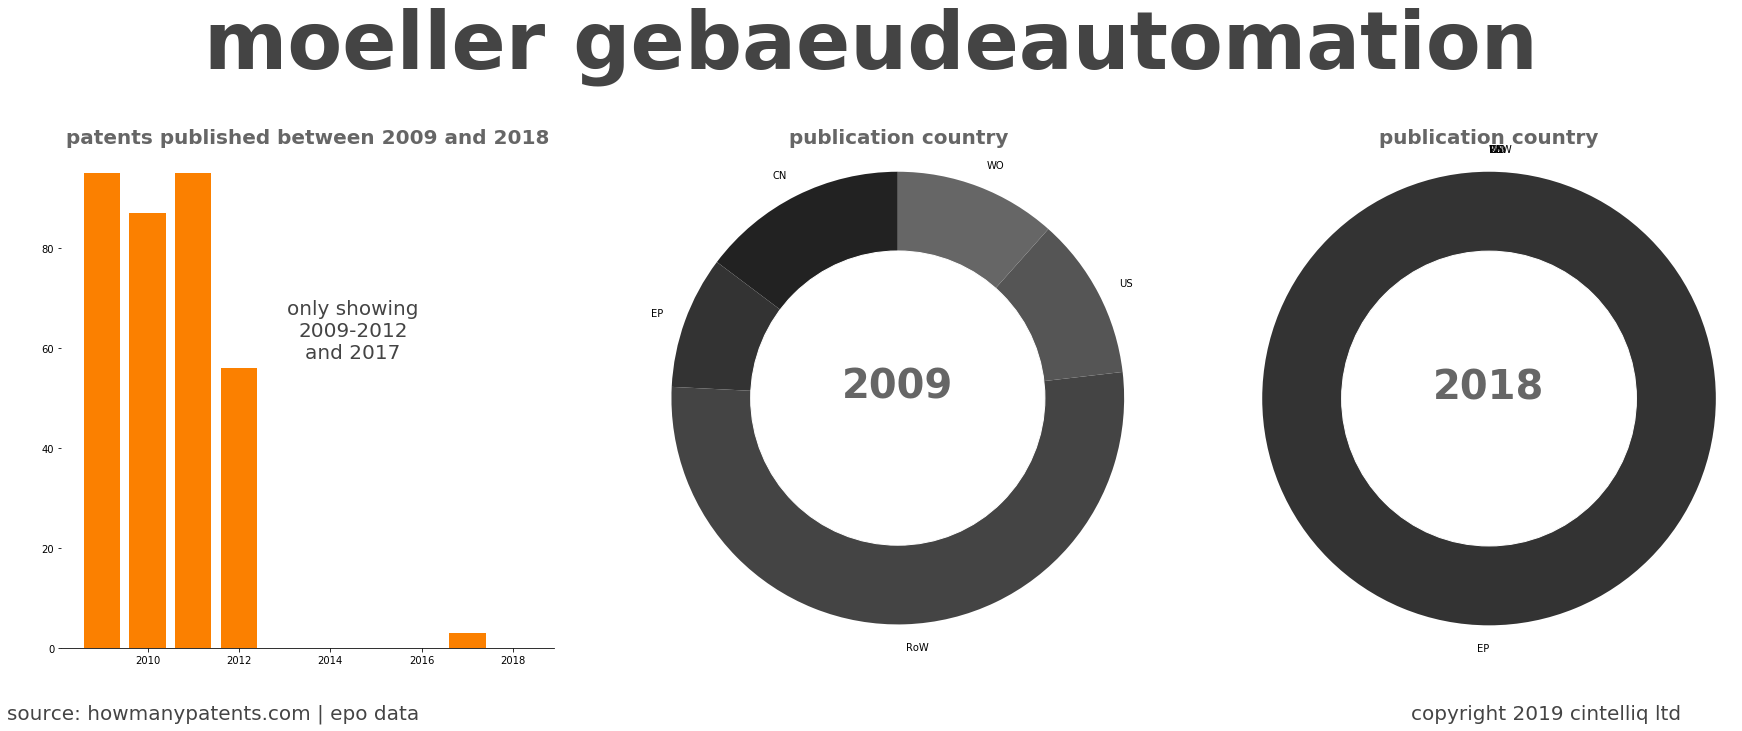 summary of patents for Moeller Gebaeudeautomation